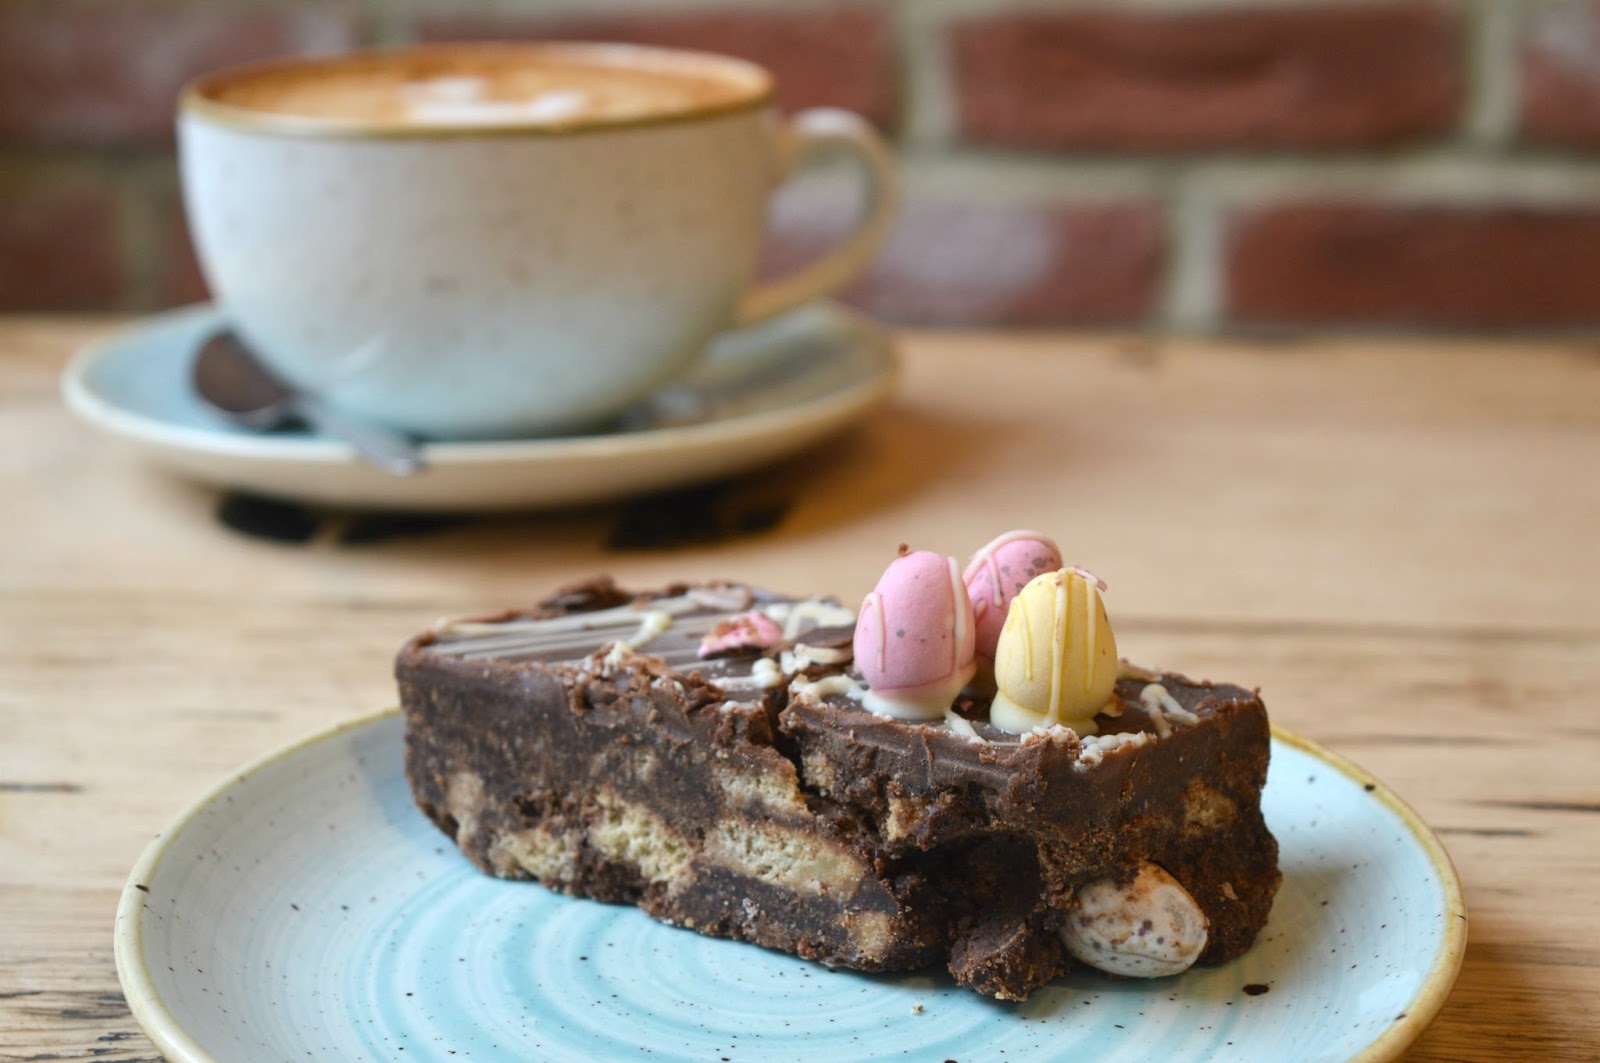 The Best Easter Cakes and Treats in Newcastle - Olive and Bean